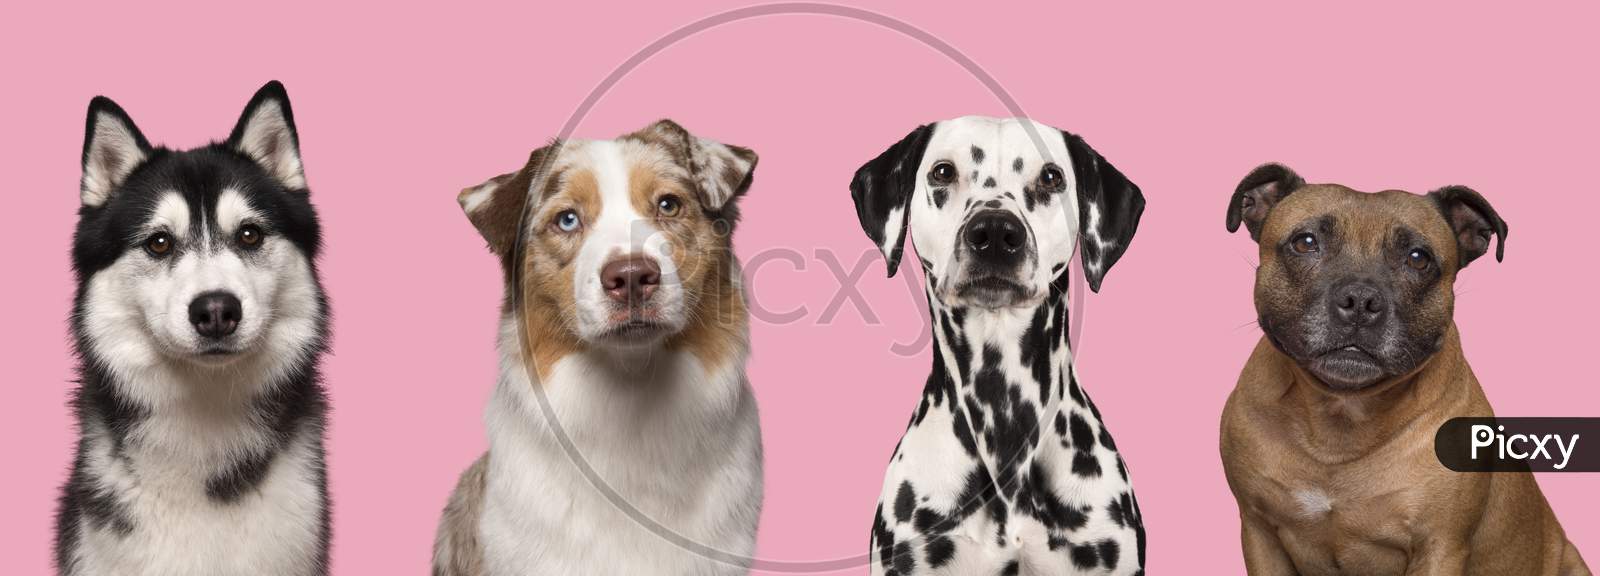 Portraits Of Various Dogs Looking At The Camera On A Pink Background